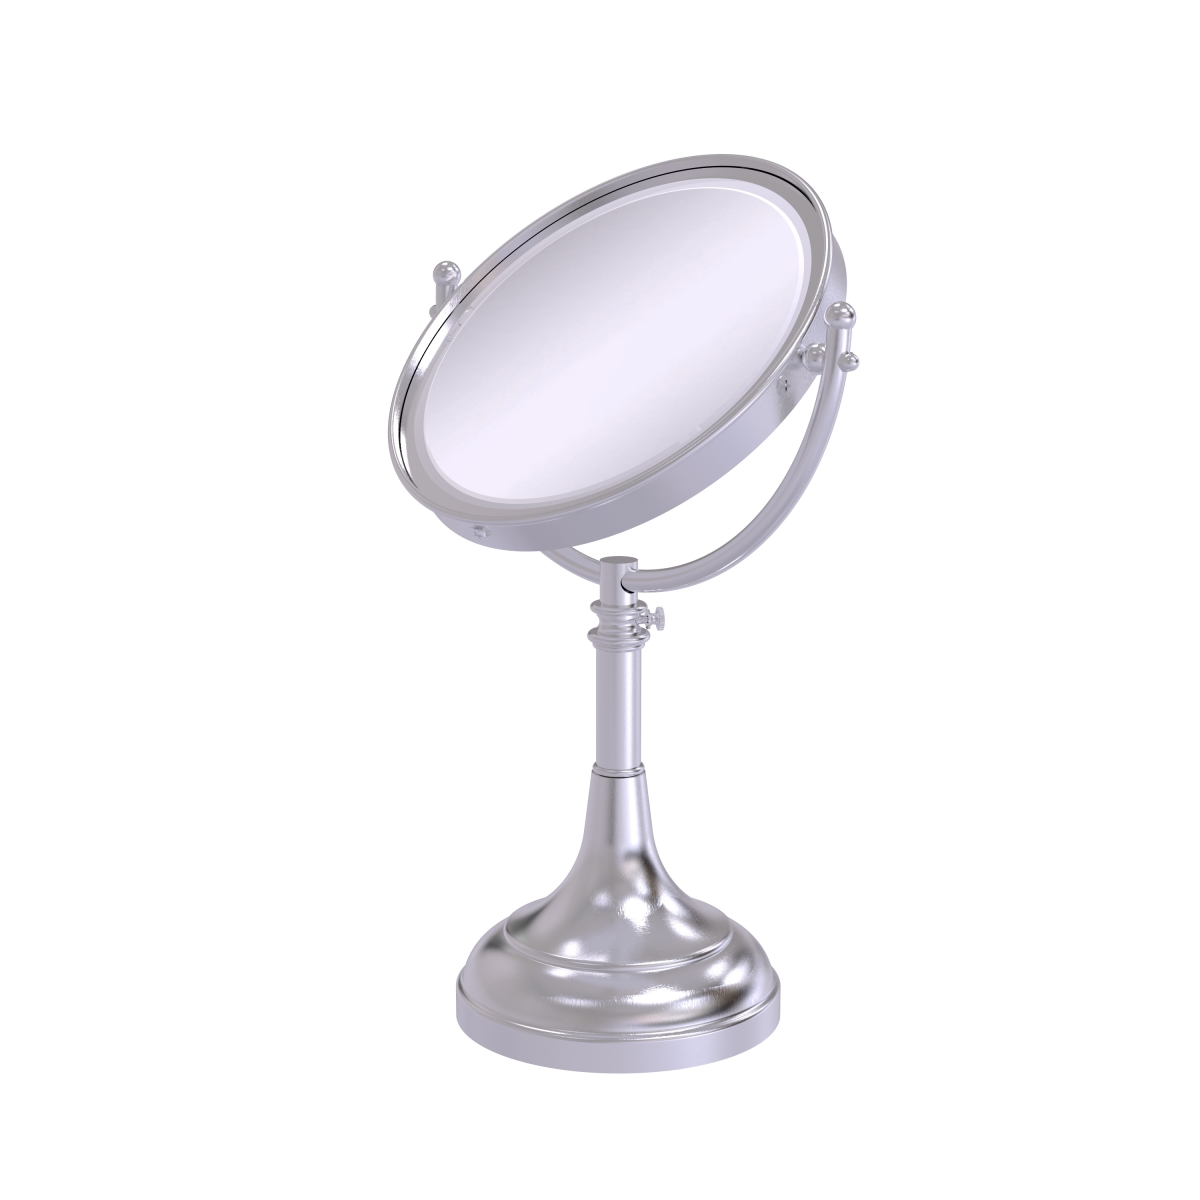 Picture of Allied Brass DM-1-2X-SCH 8 in. Height Adjustable Vanity Top Make-Up Mirror 2X Magnification, Satin Chrome